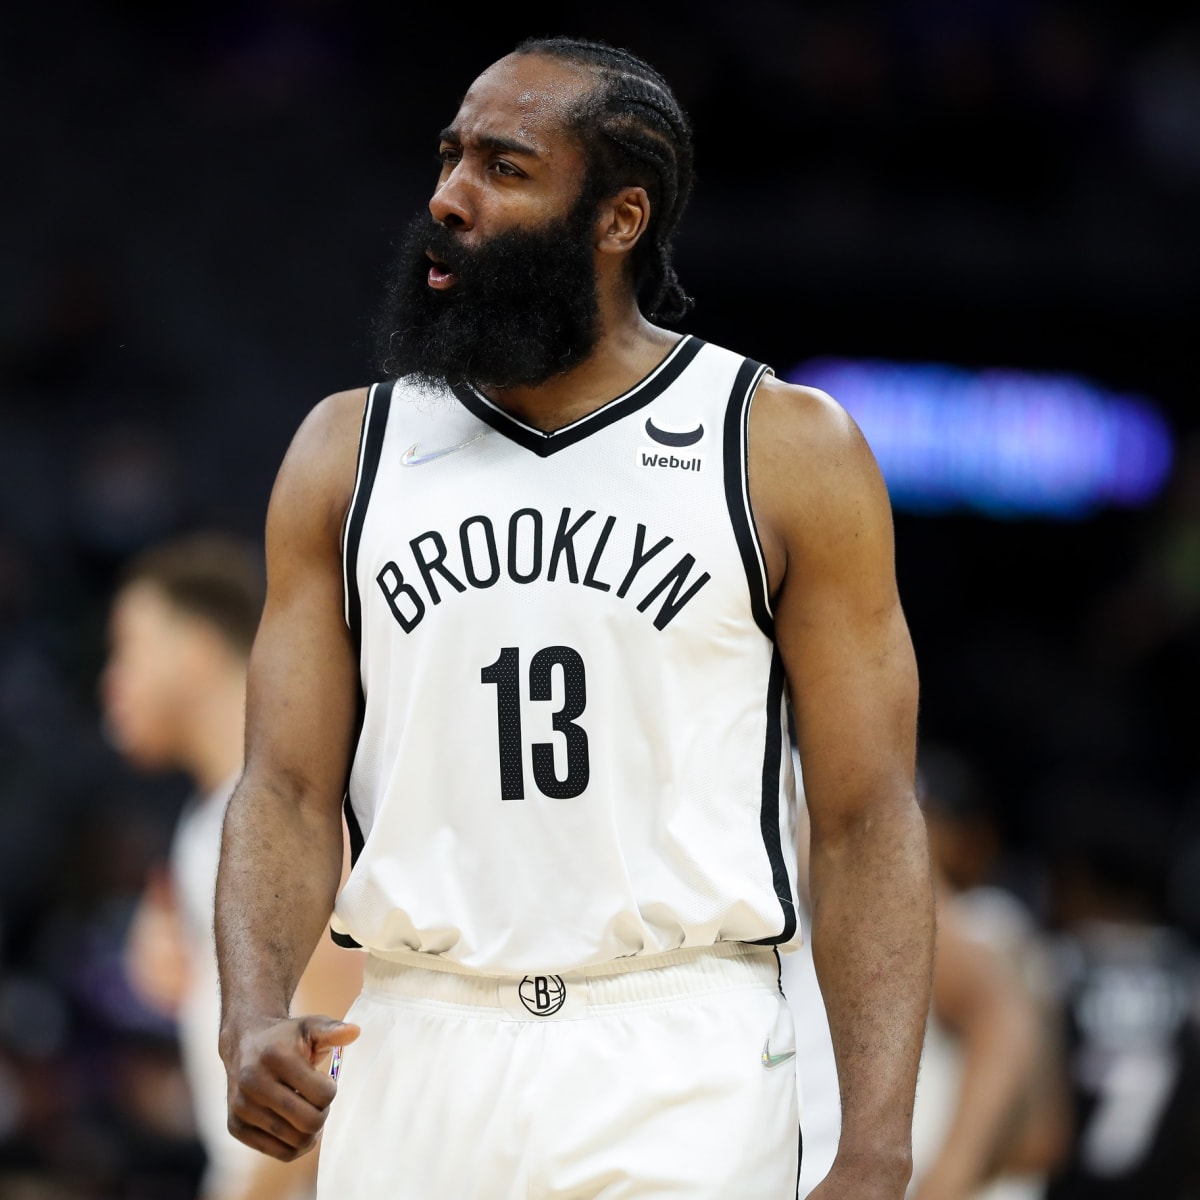 NBA Rumors: Nets' James Harden Won't Force Trade to Sixers